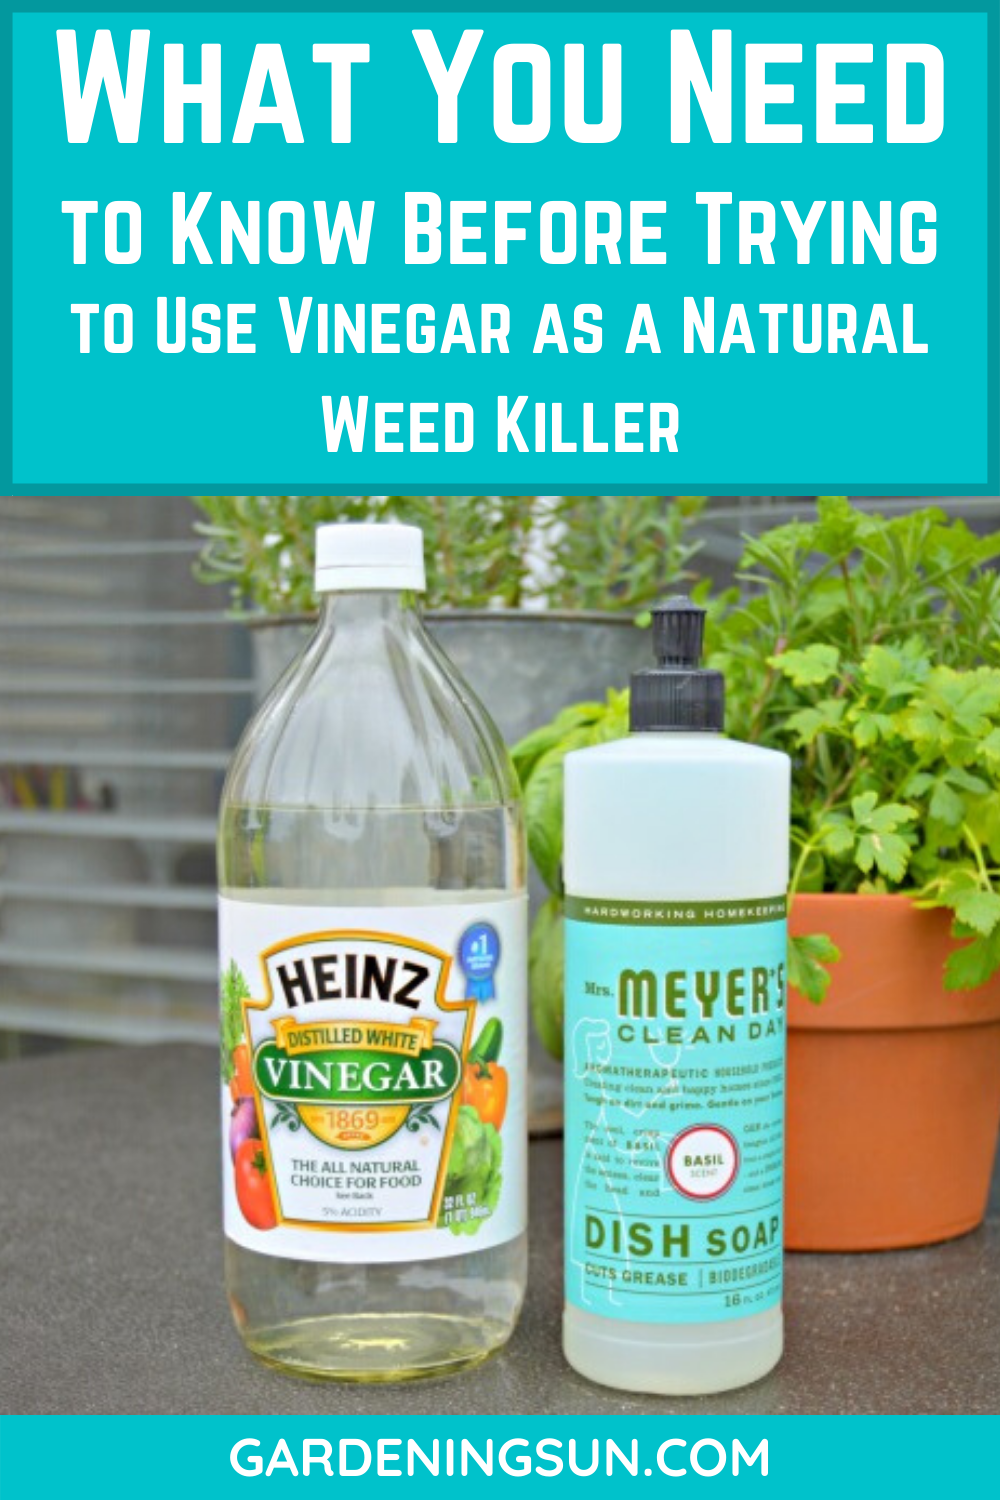 What You Need to Know Before Trying to Use Vinegar as a Natural Weed